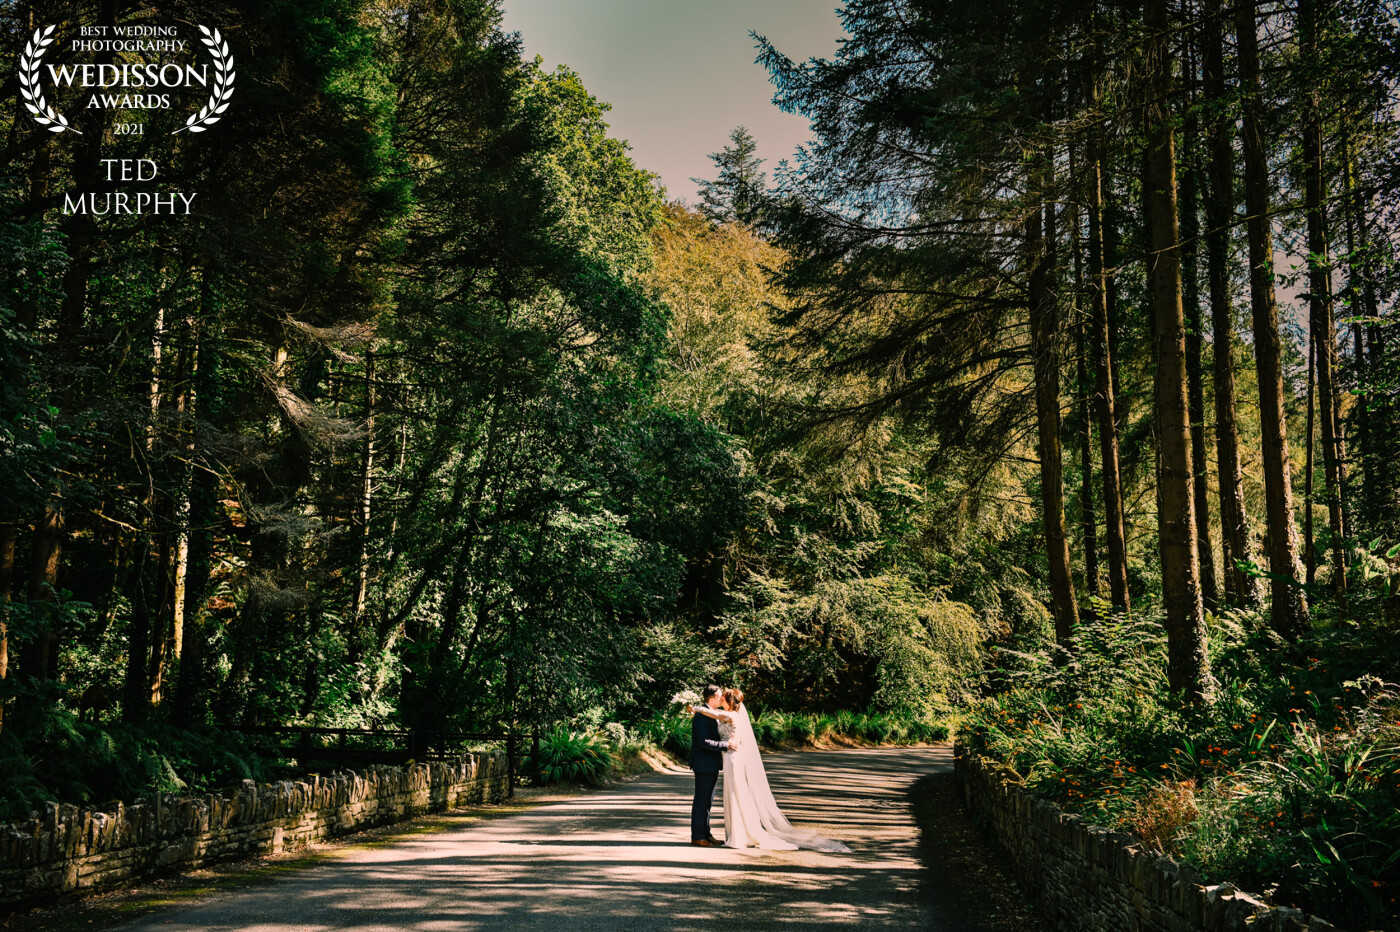 Robyn & Trevor in the beautiful village of Rathbarry, West cork. They had a fabulous picnic and champagne ready for their guests once they left the churchyard and the party began then at the world-famous Inchydoney Island Hotel & Spa.